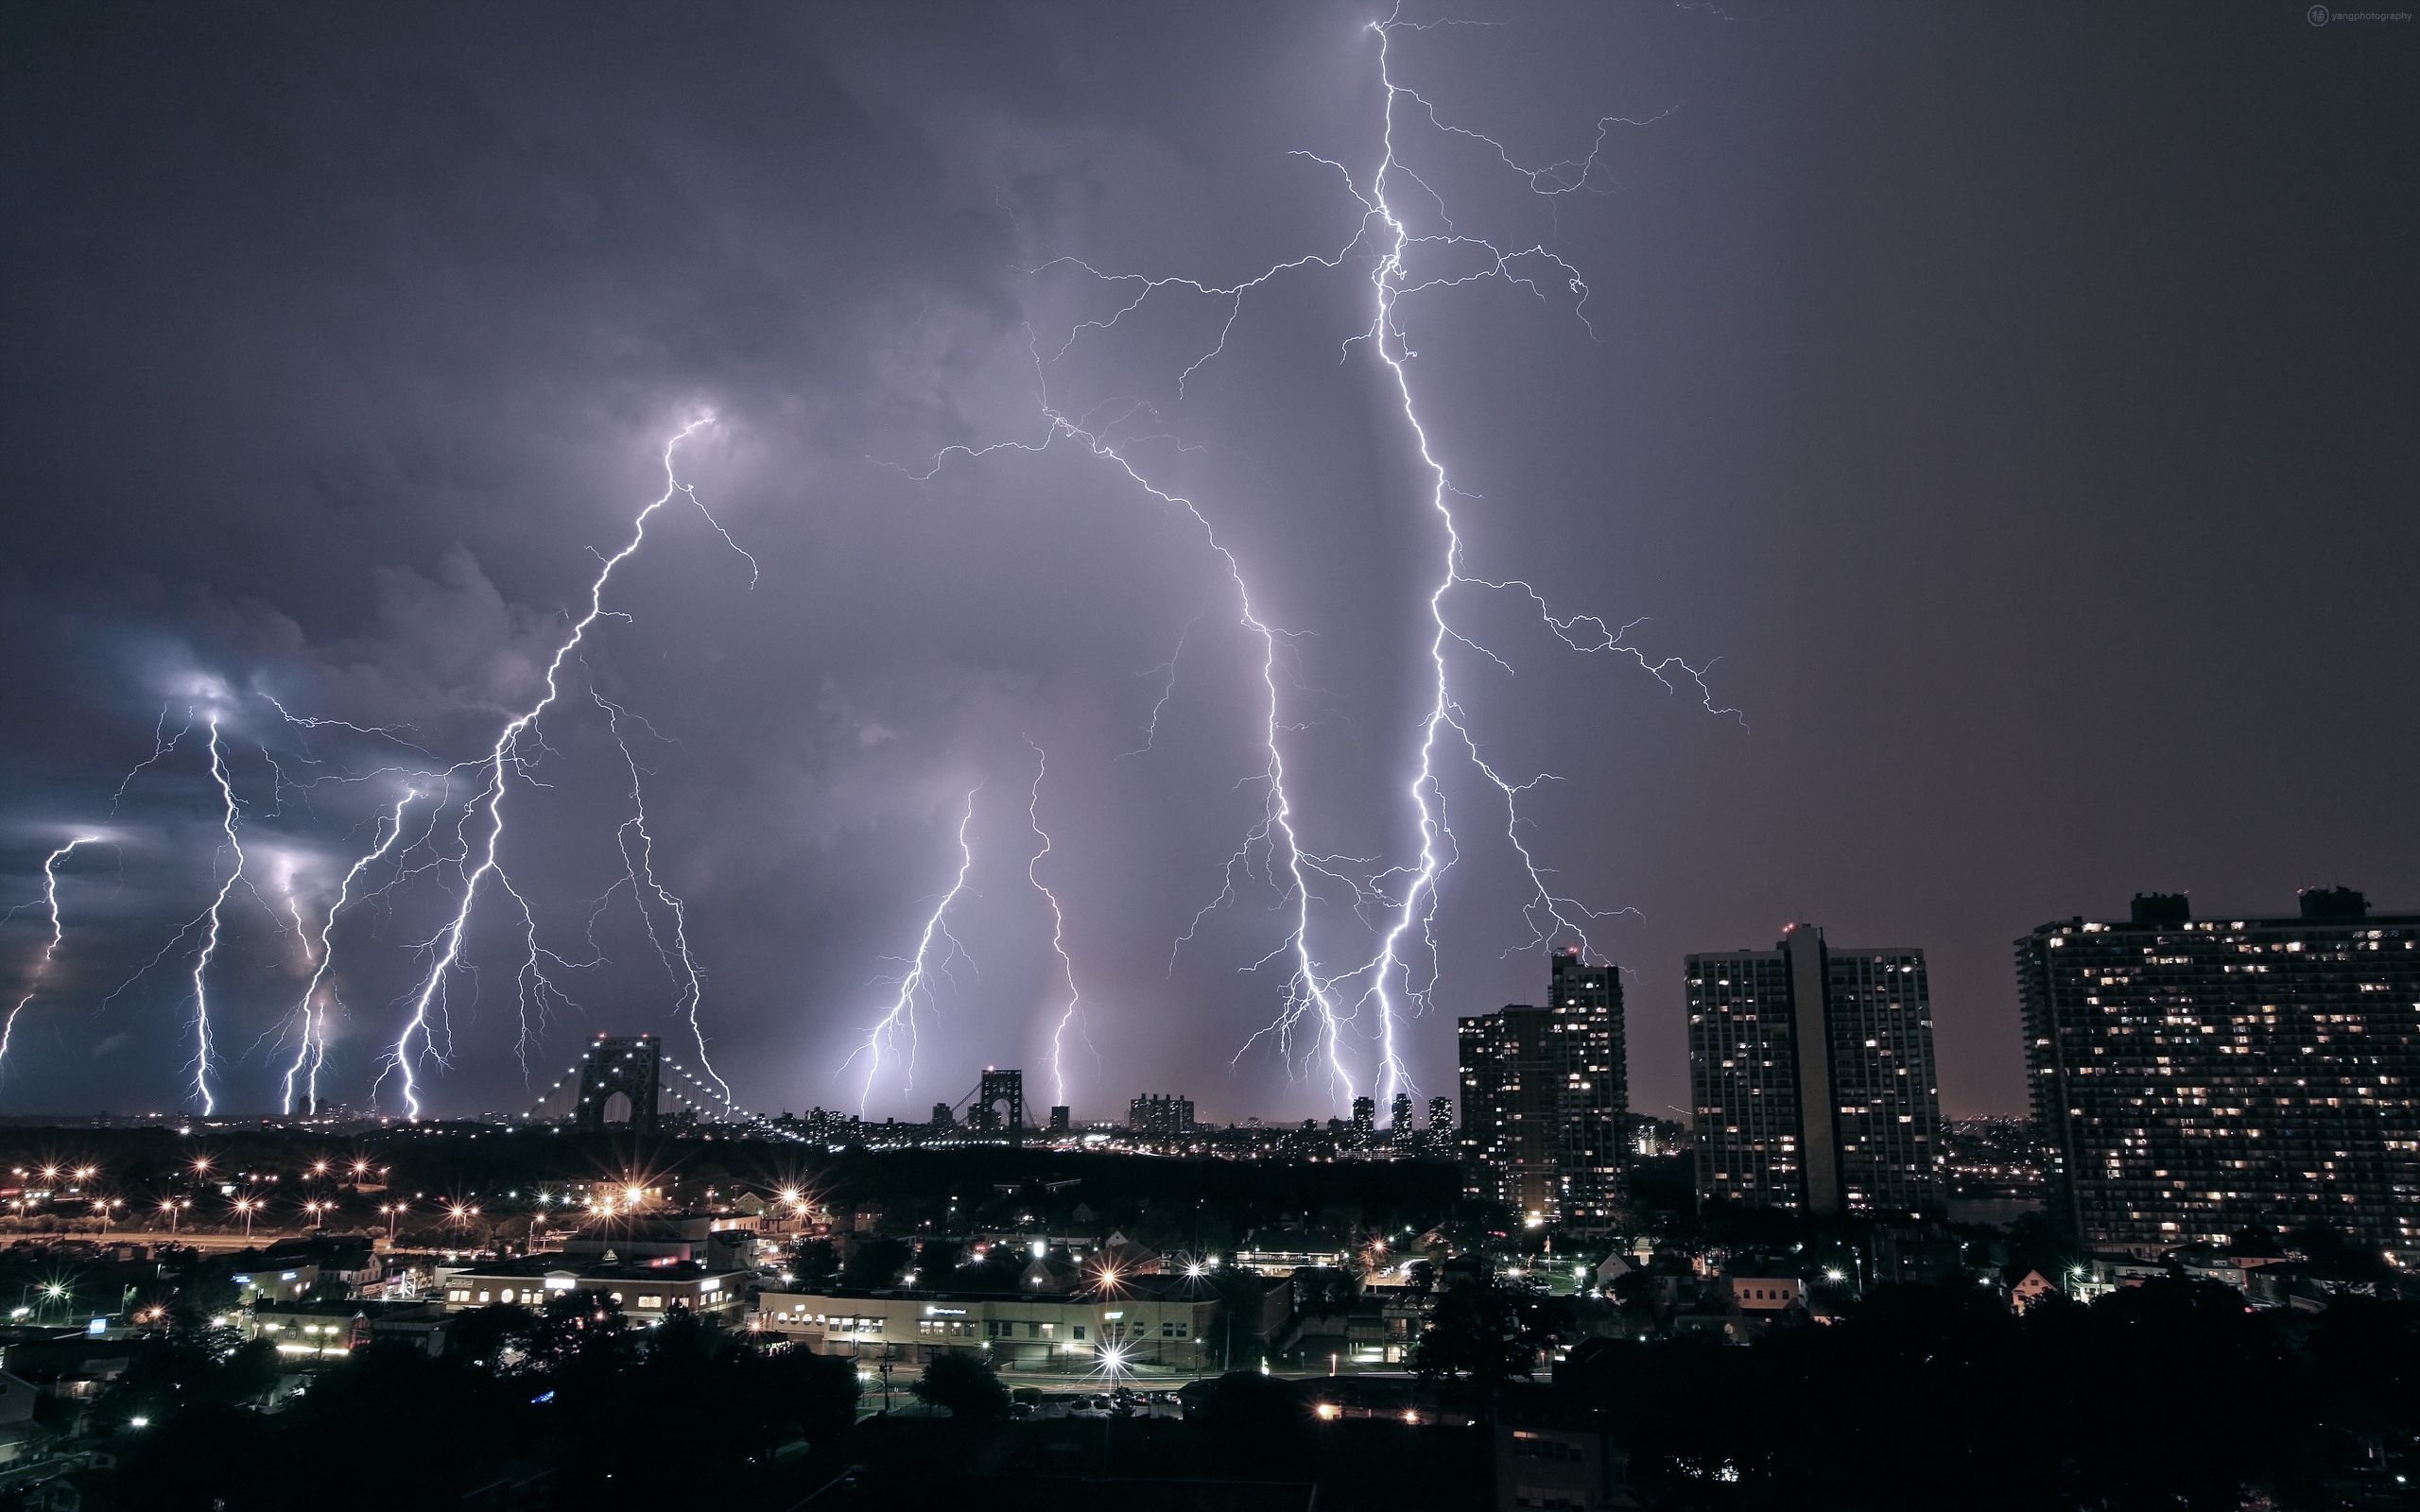 A city skyline with lightning in the background - Lightning, storm